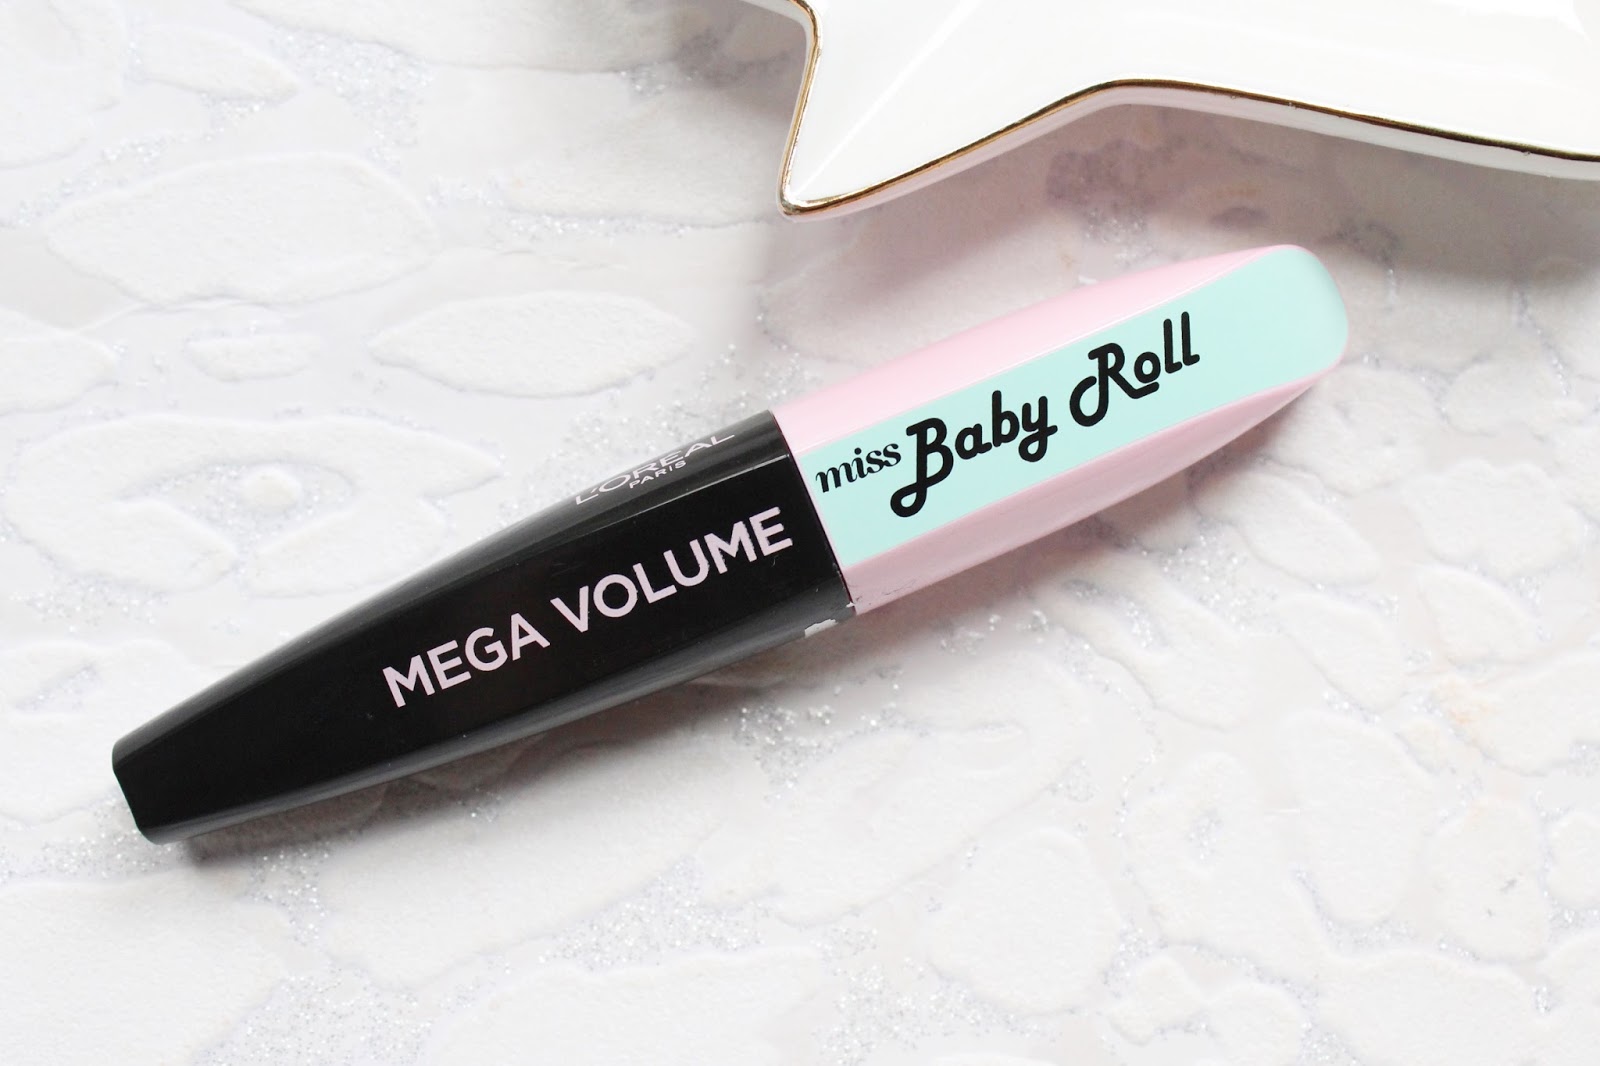 L'Oreal Miss Baby Roll Mascara 